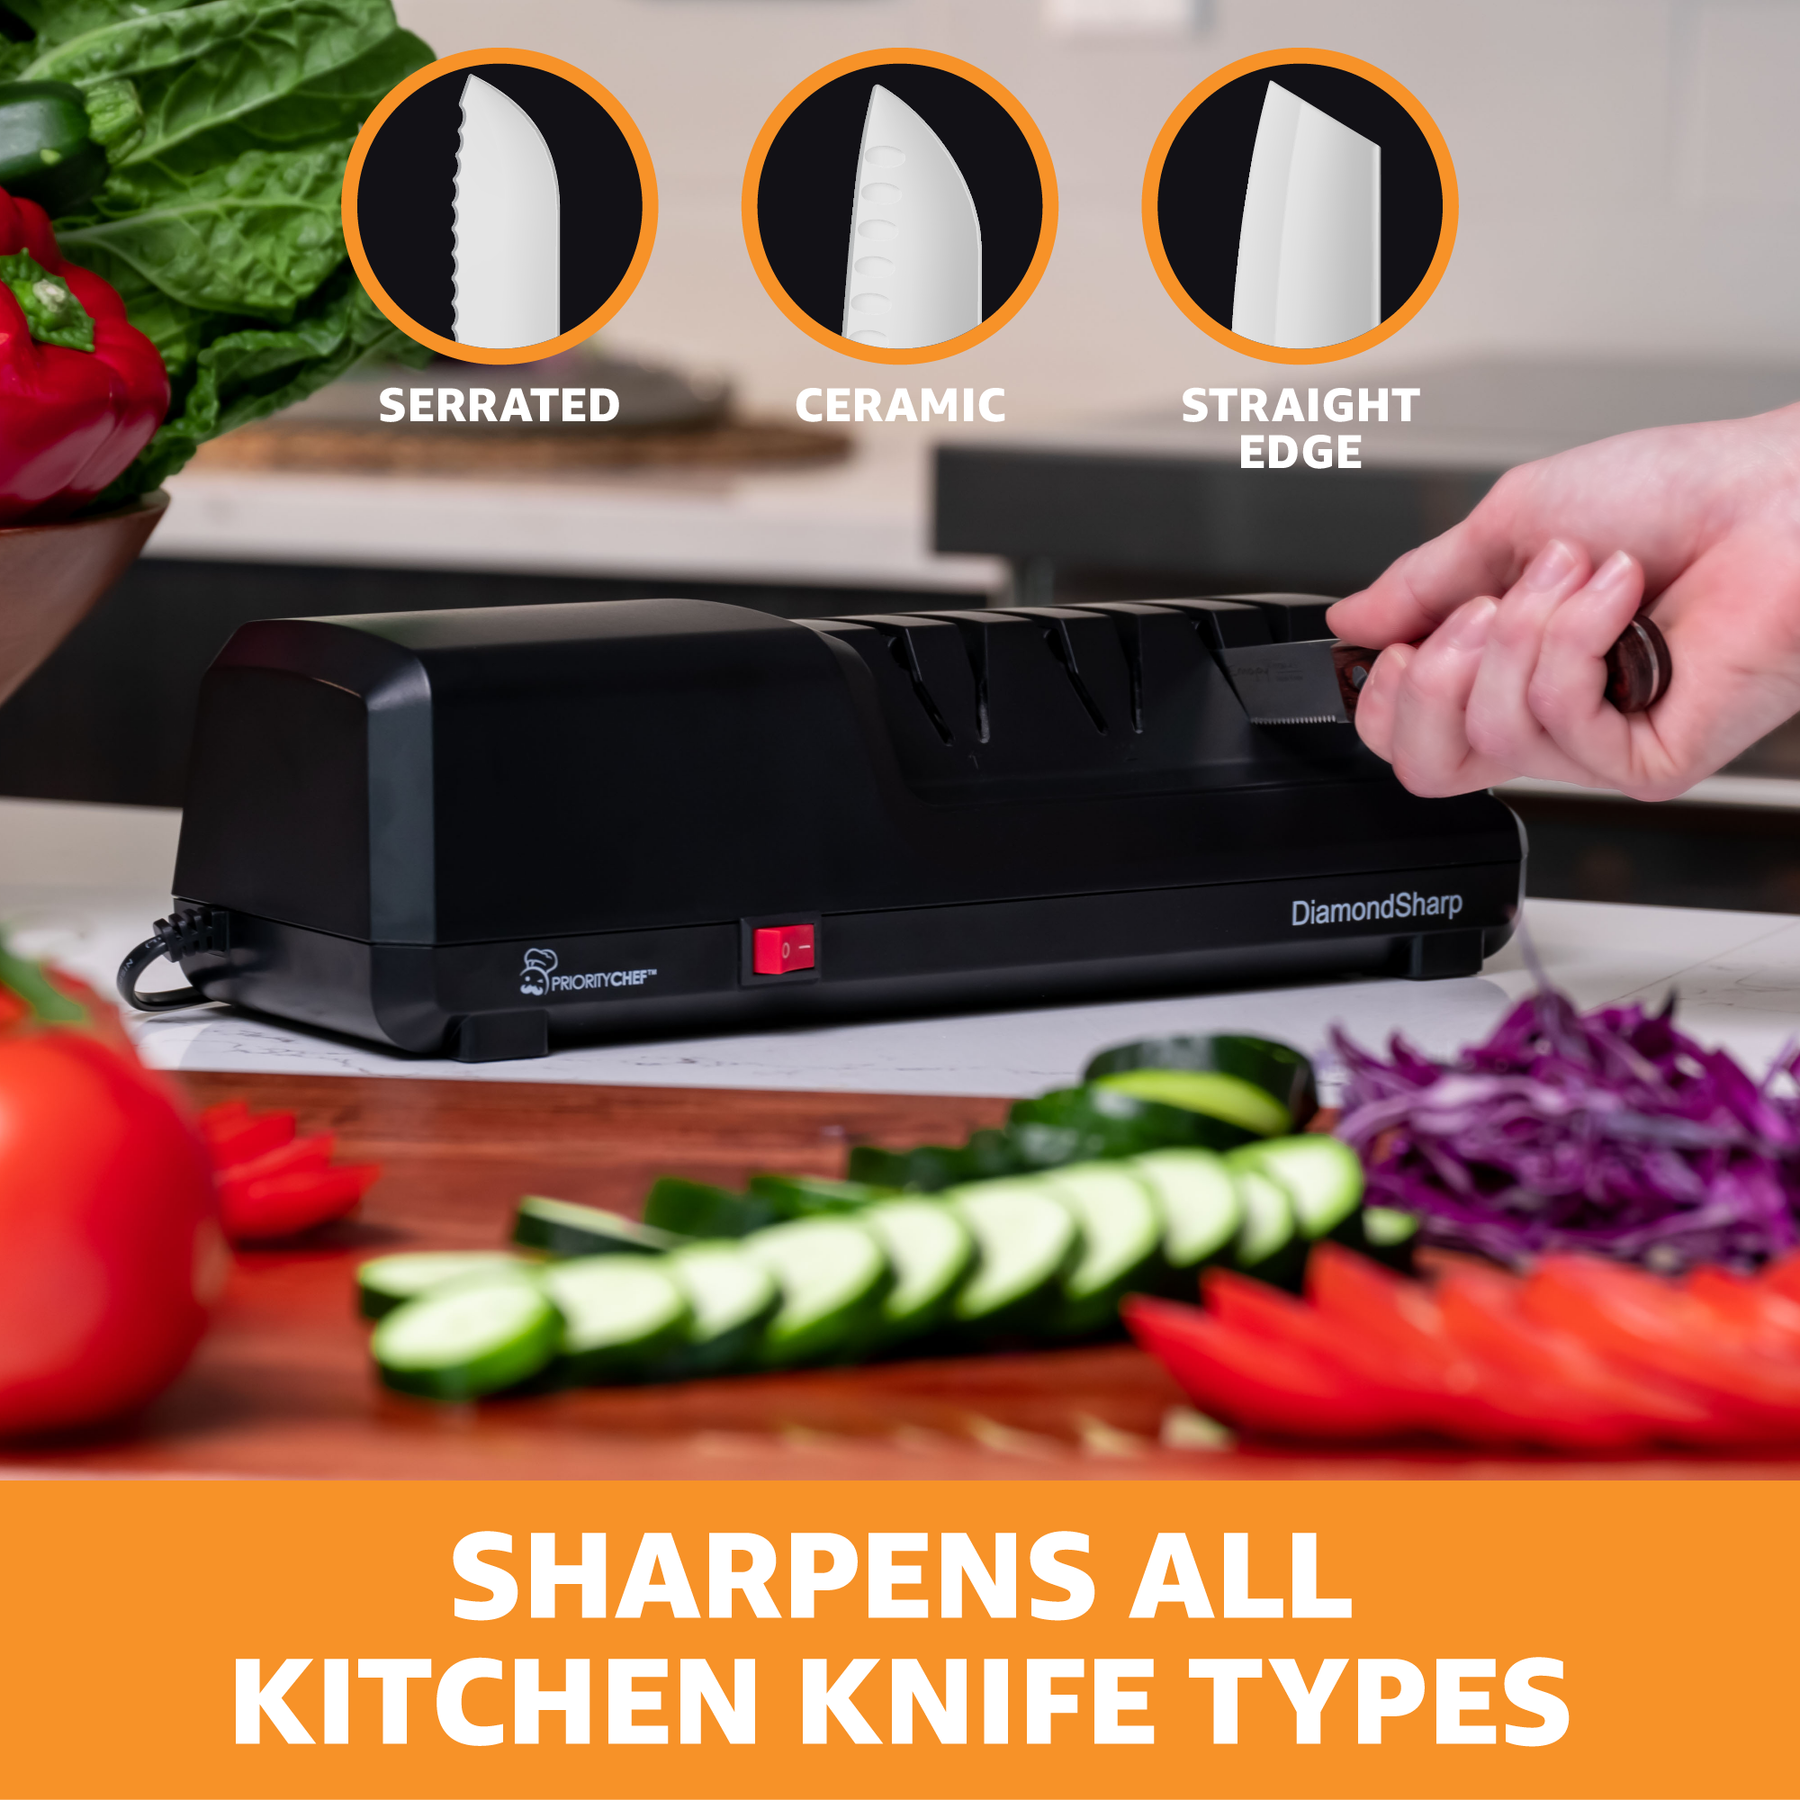 PriorityChef Knife Sharpener Review: Simple and Fairly Effective